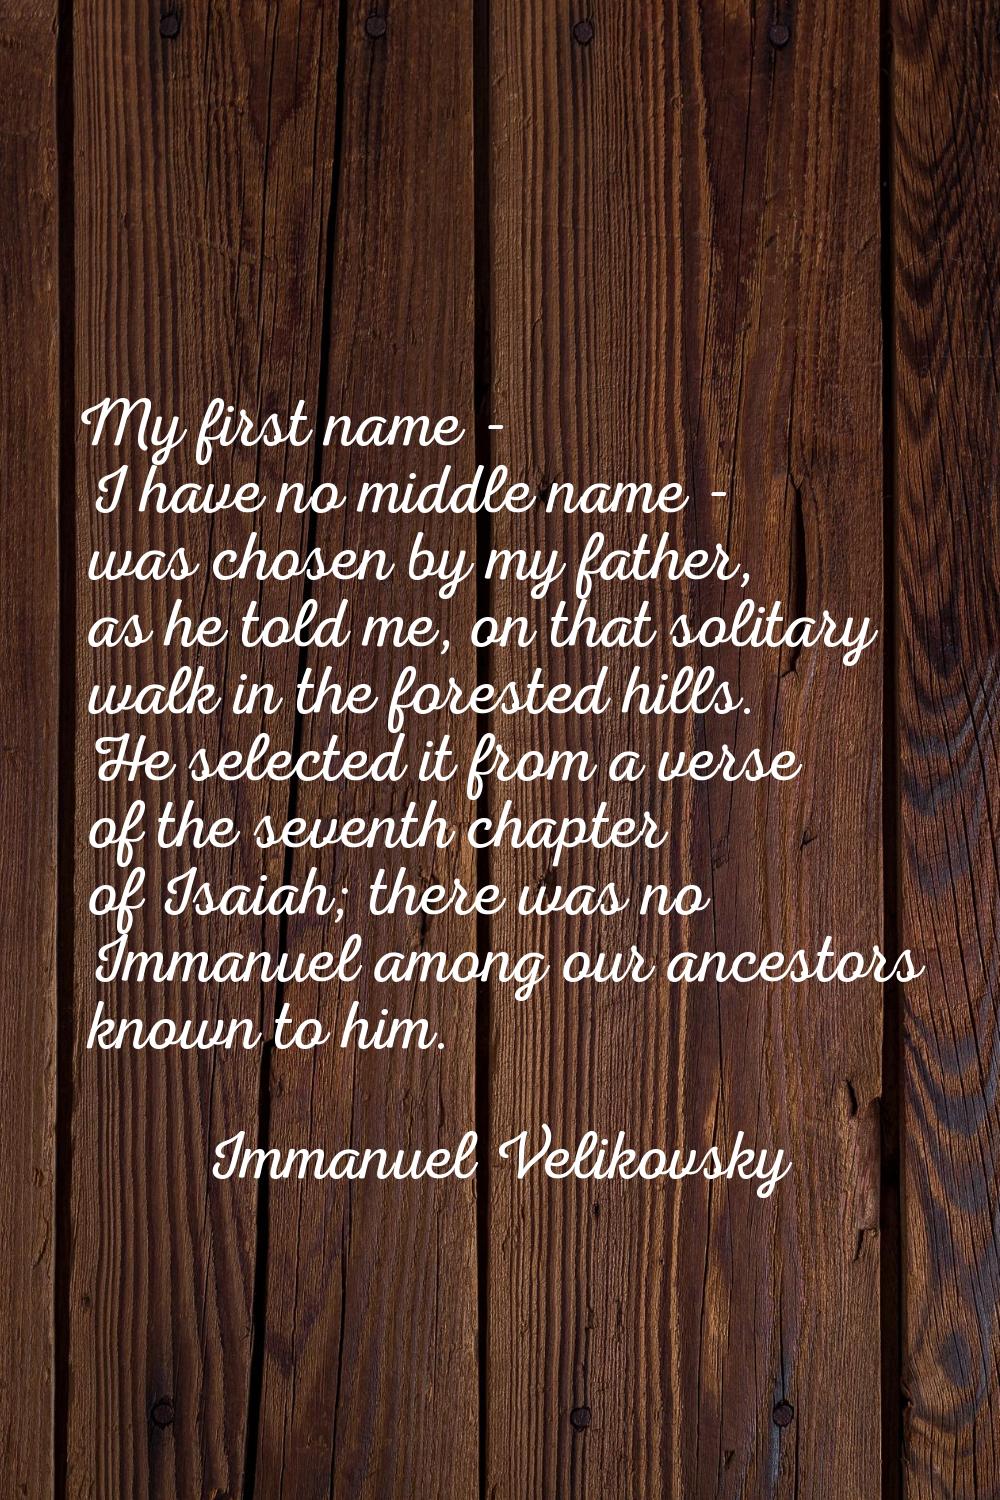 My first name - I have no middle name - was chosen by my father, as he told me, on that solitary wa